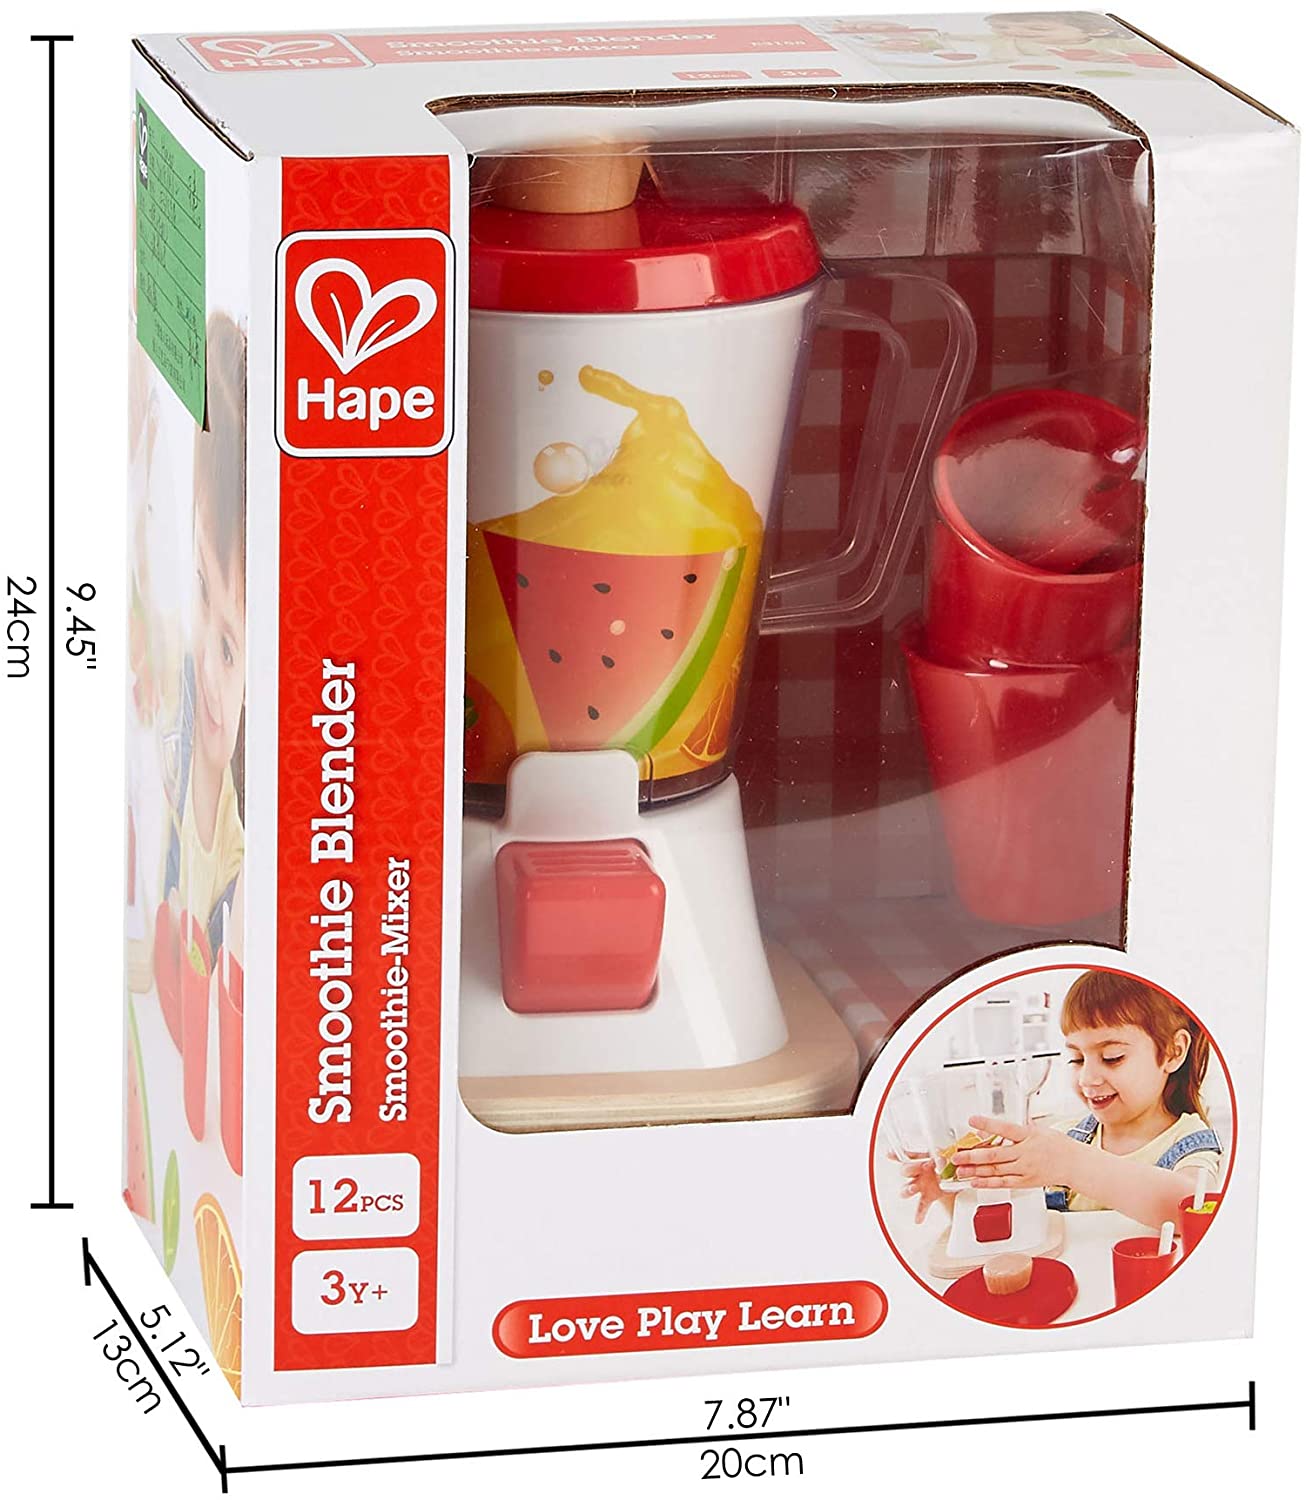 Hape Smoothie Blender | Multicolor Kitchen Smoothie Machine Play Set Complete with Cups & Straws, 9.44 Inch